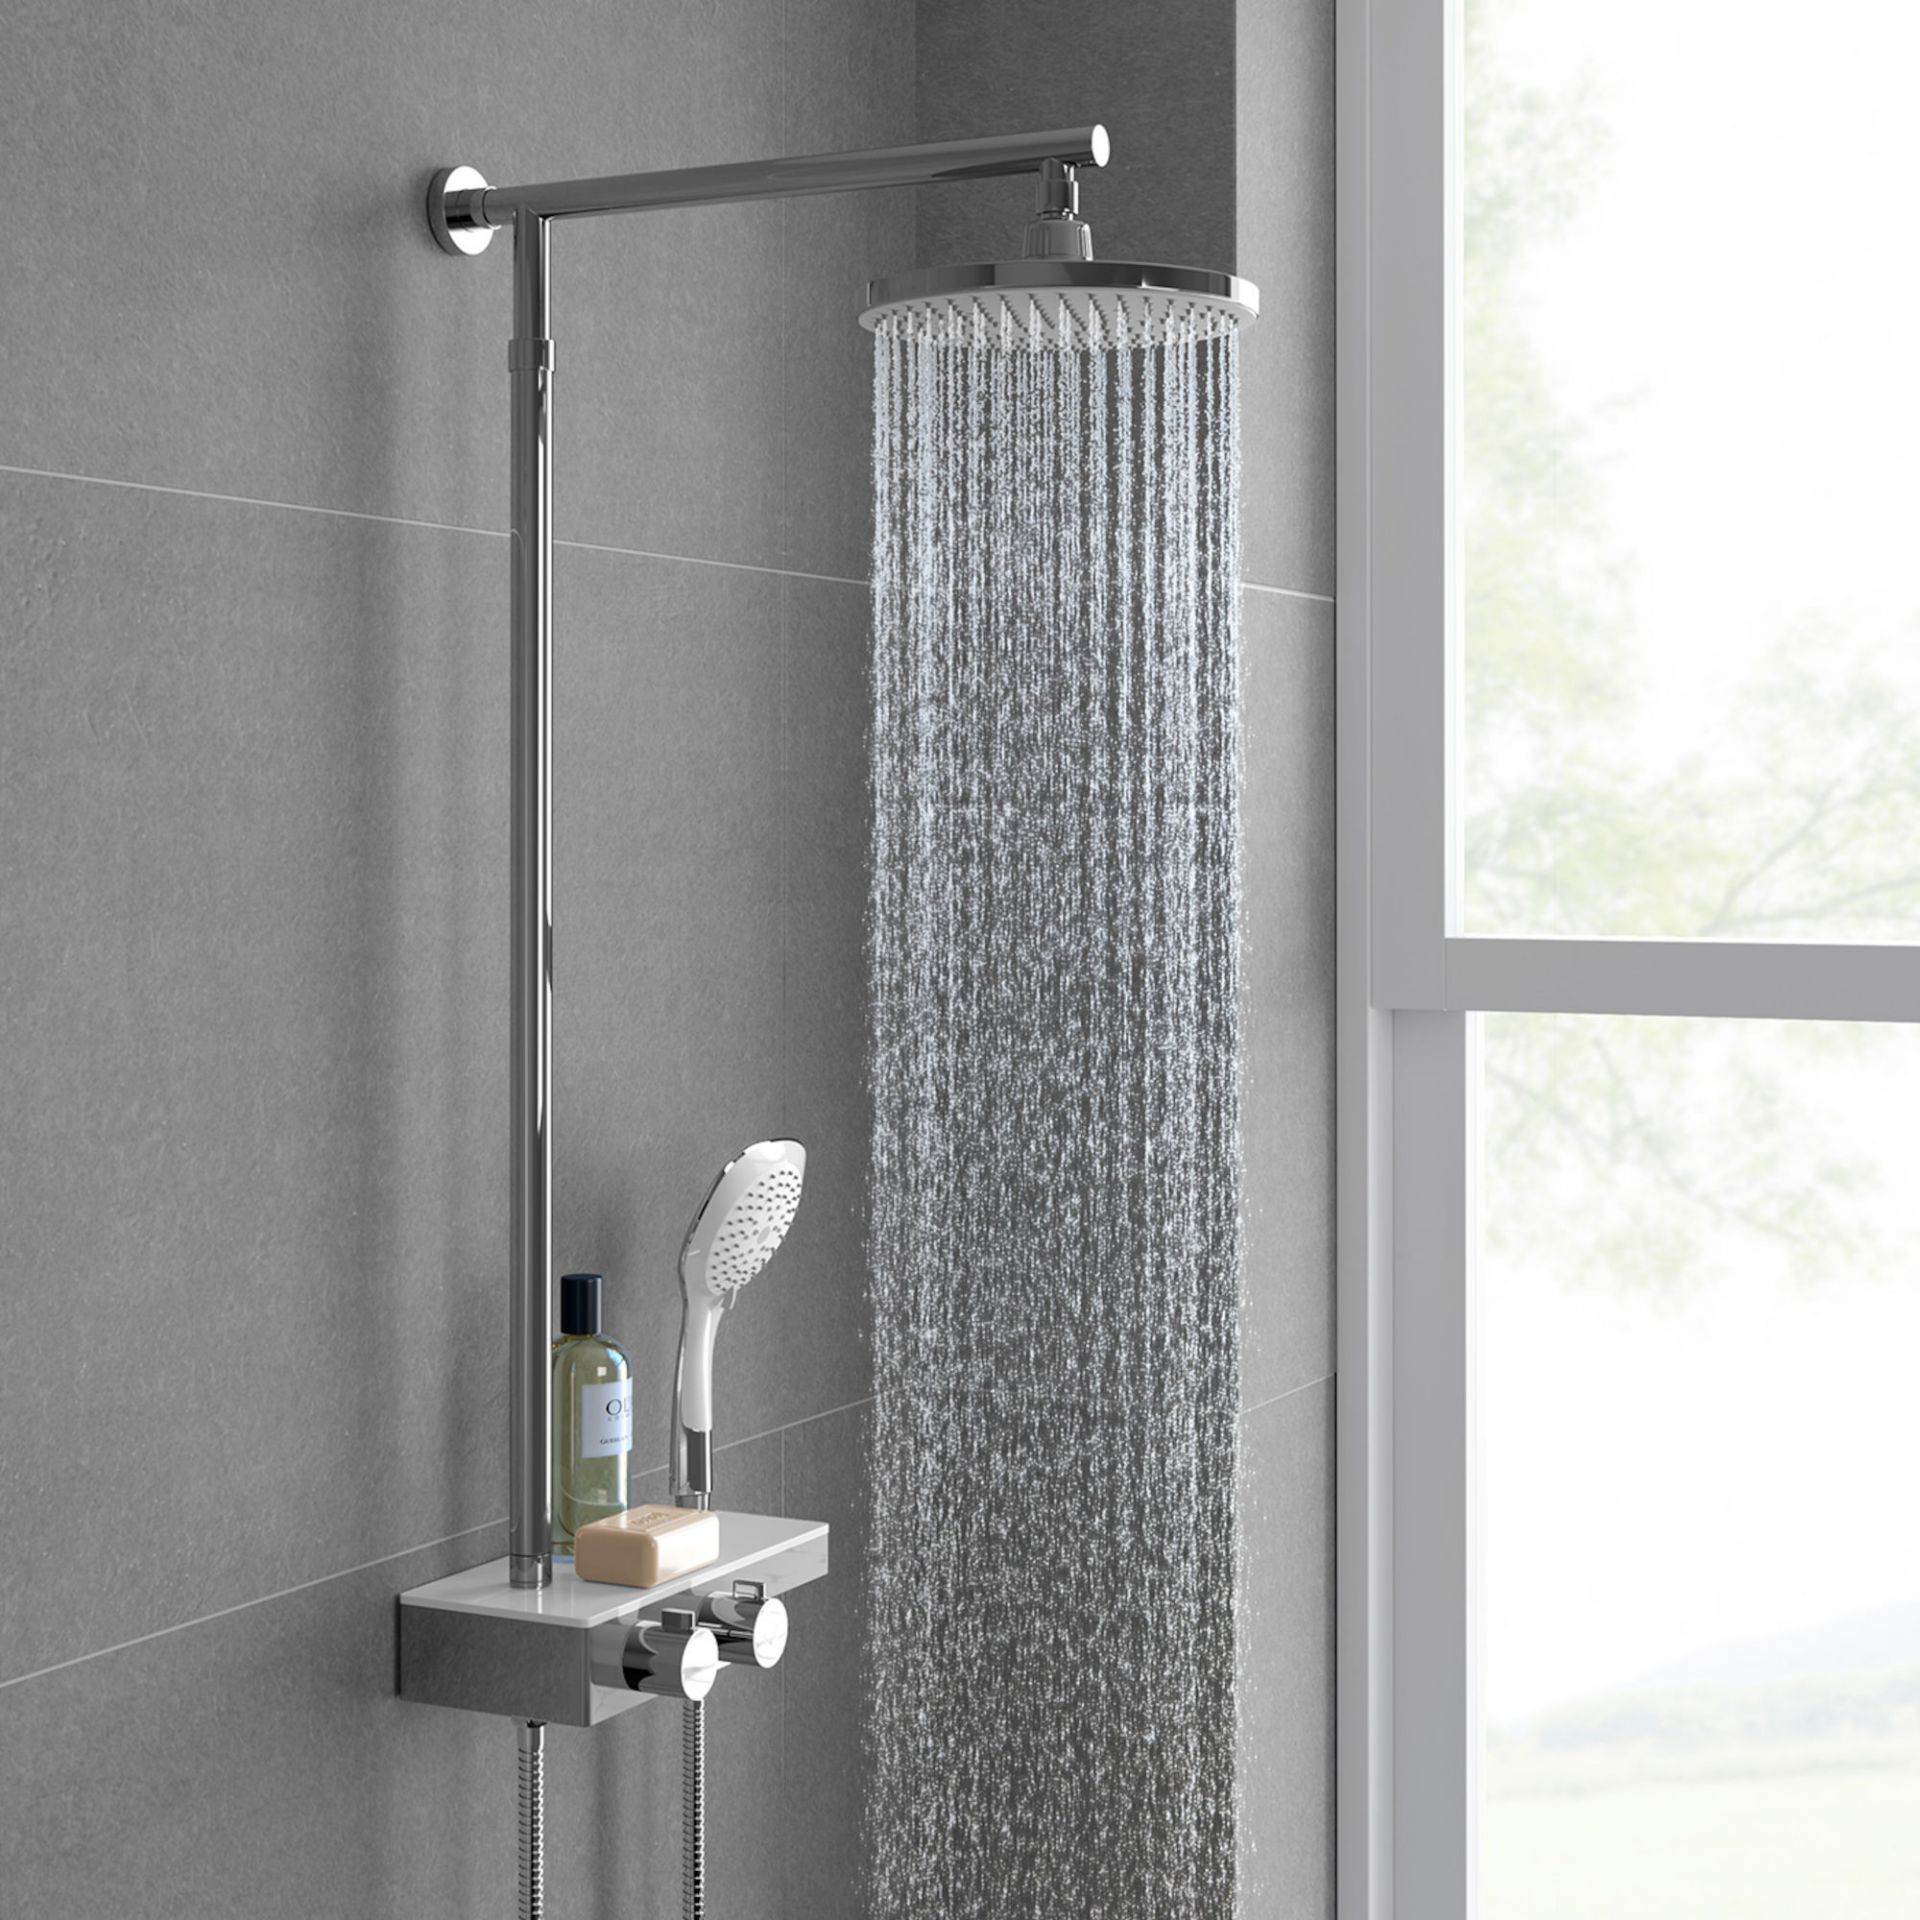 (CT196) Round Exposed Thermostatic Mixer Shower Kit Medium Head & Shelf. Cool to touch shower for